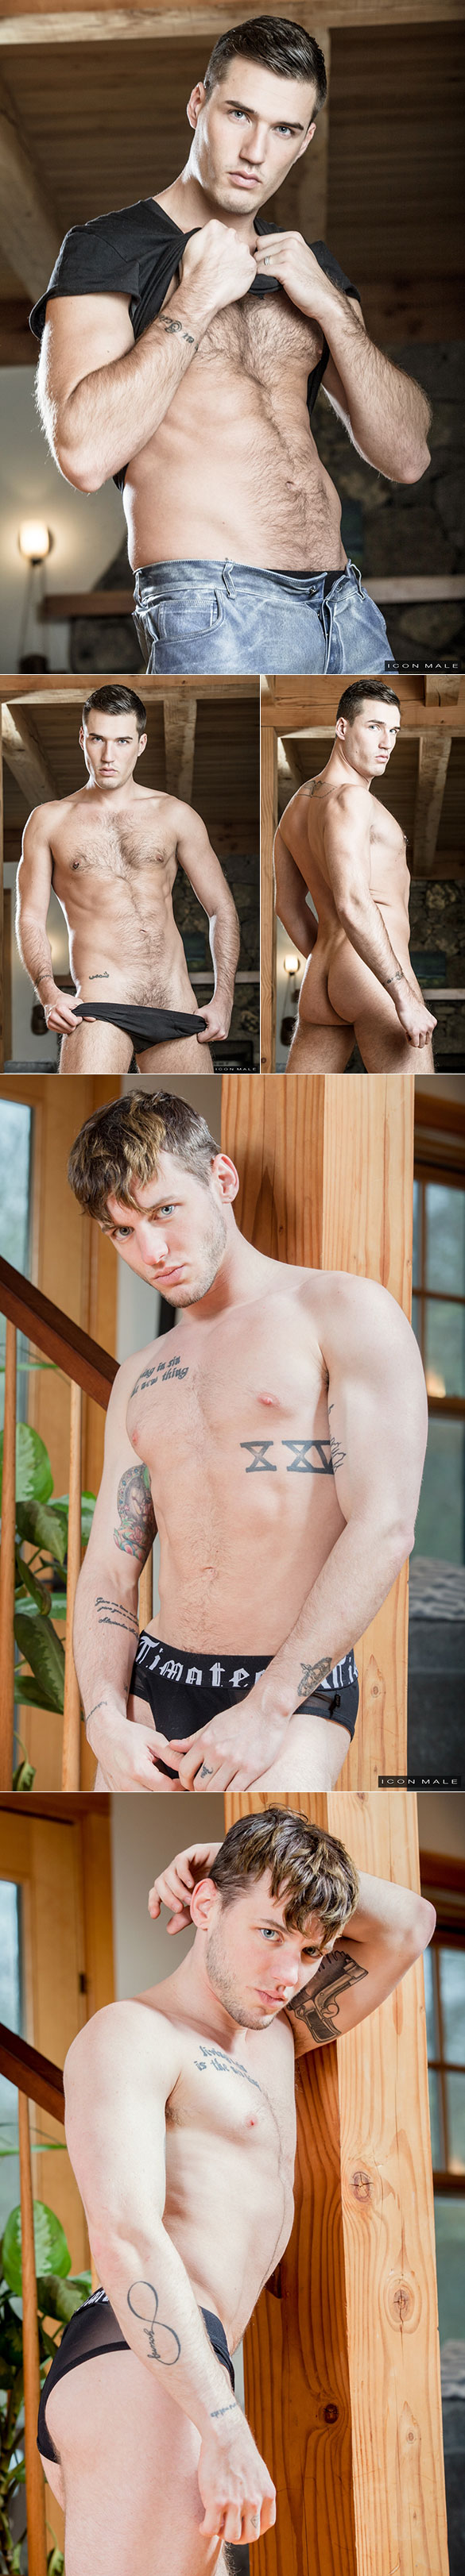 IconMale: Theo Ford fucks Colton Grey in "Brothers"